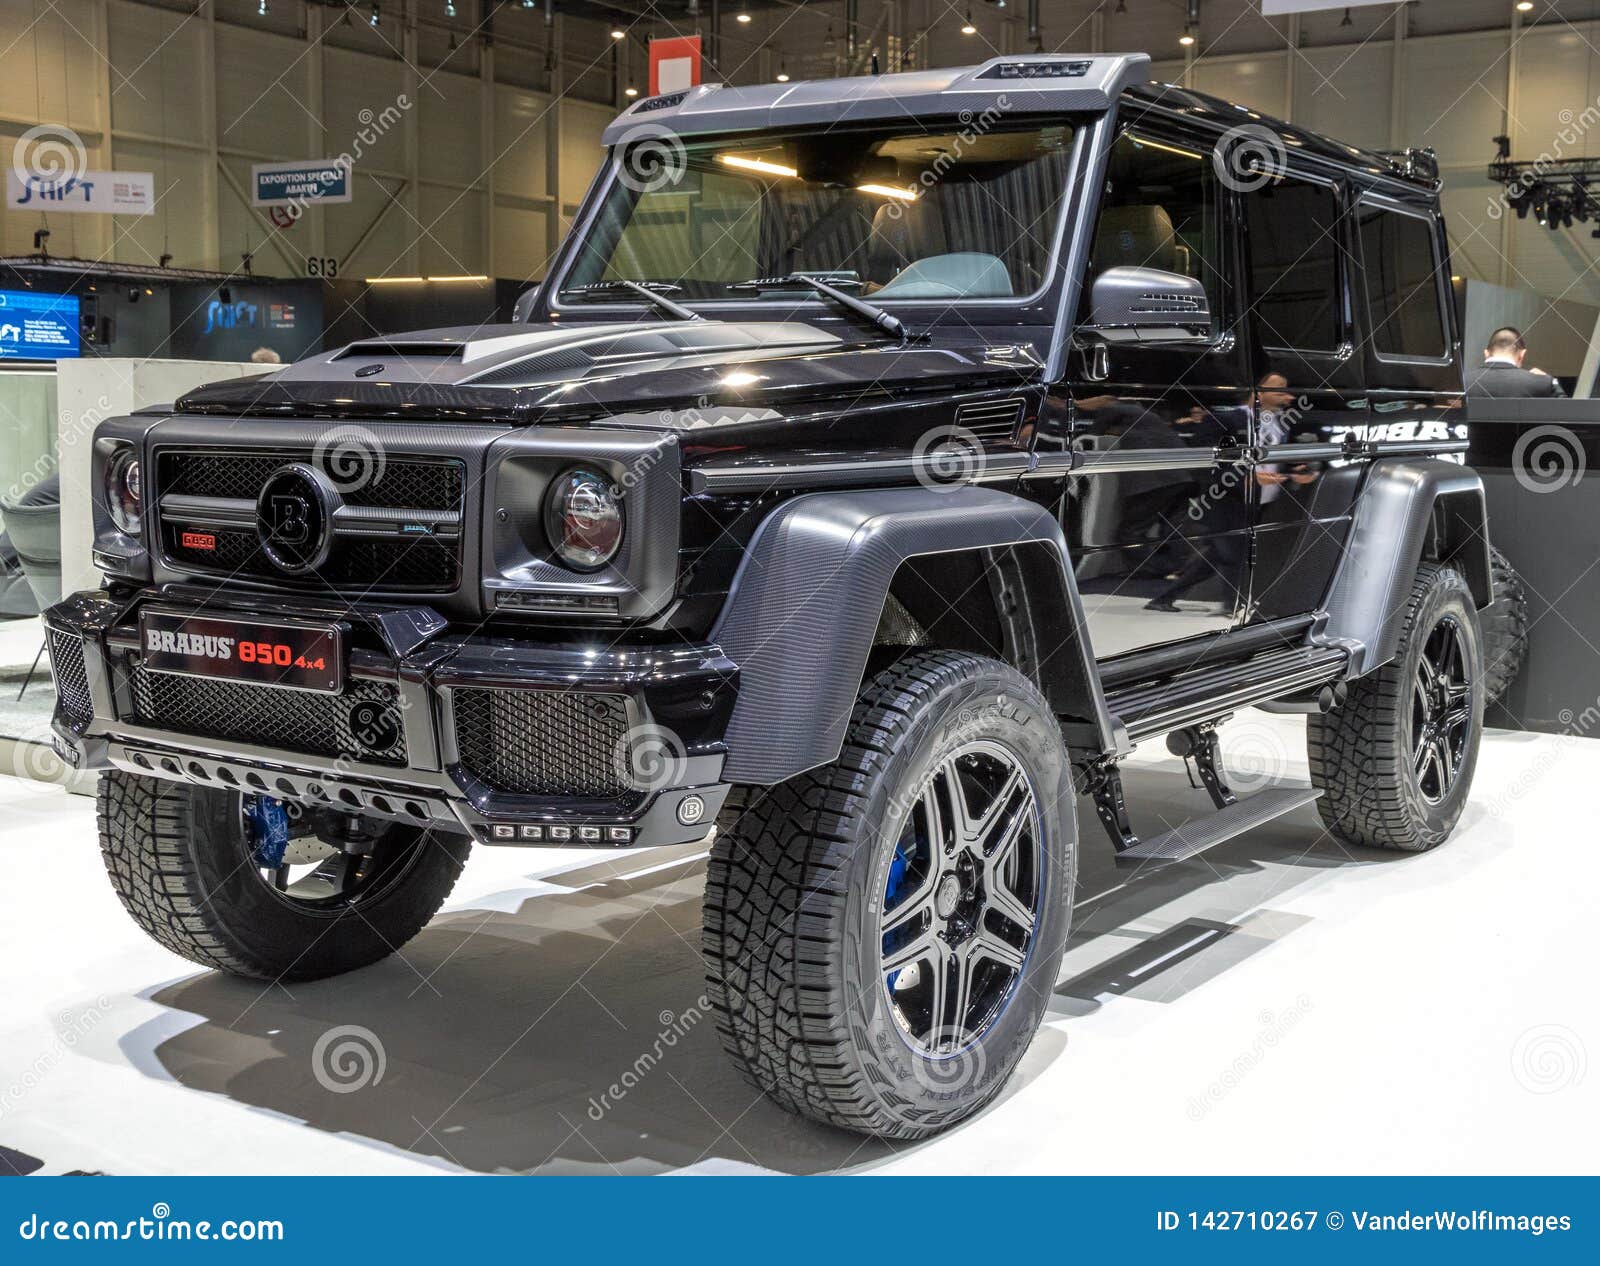 Brabus Mercedes Amg G63 800 Widestar Car Editorial Photography Image Of Large Showroom